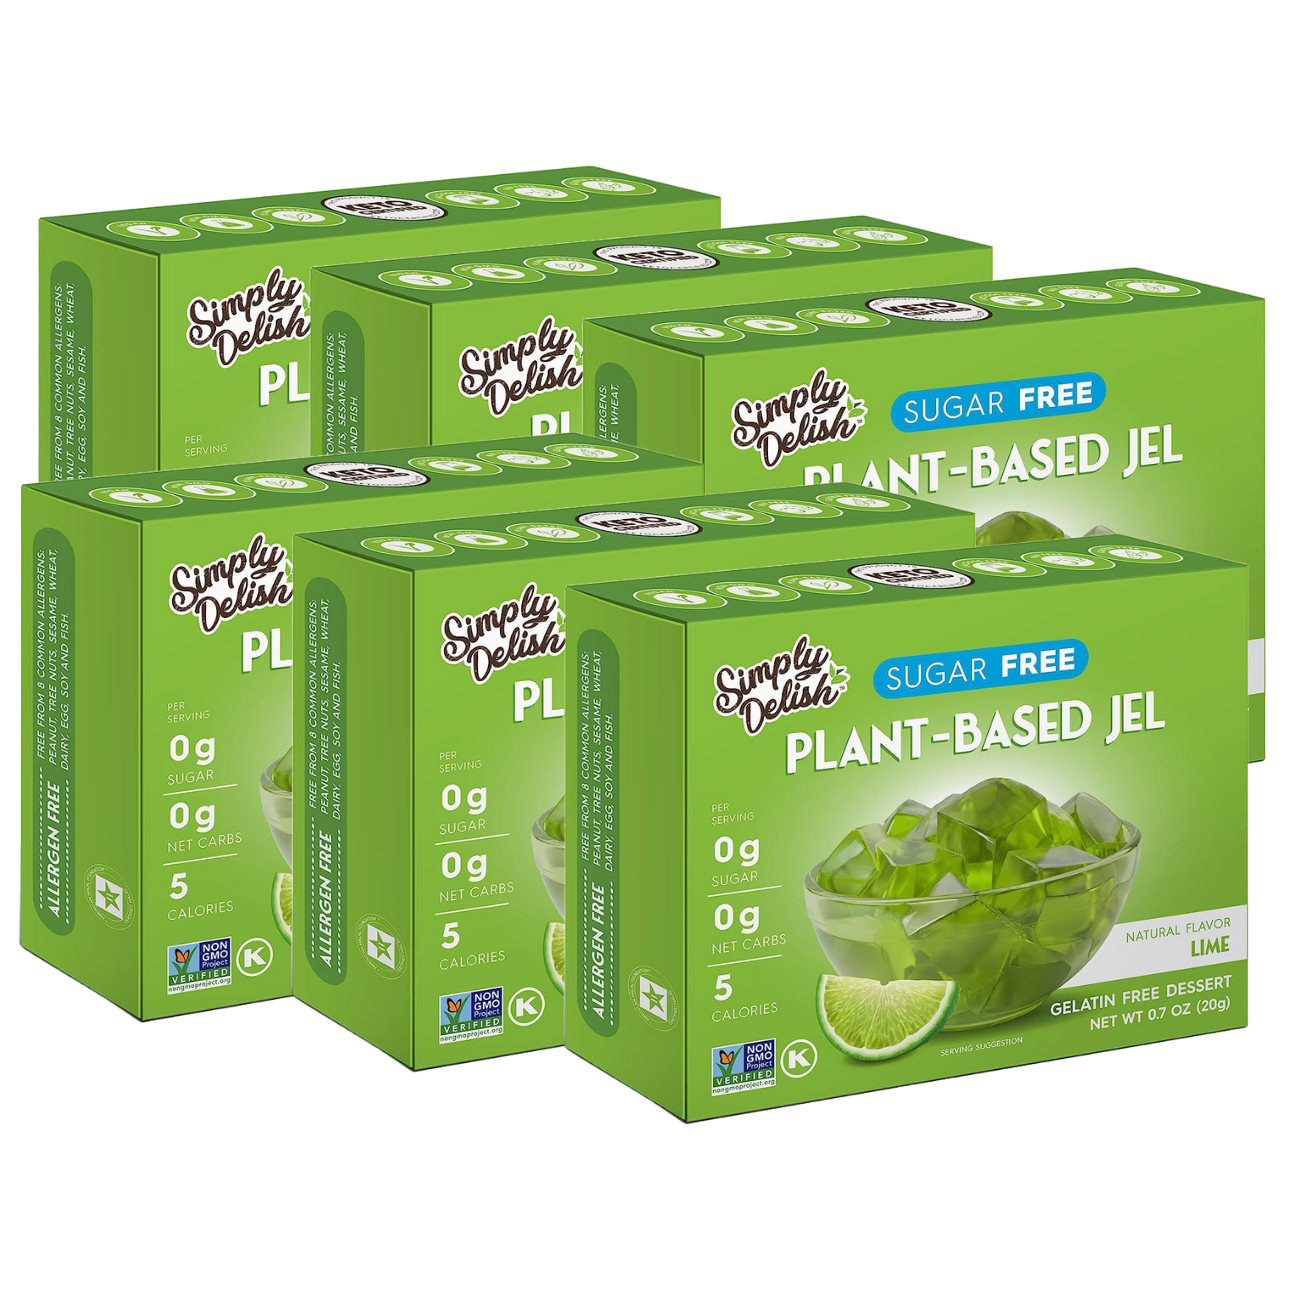 #Flavor_Lime (0.7oz) #Size_6-Pack